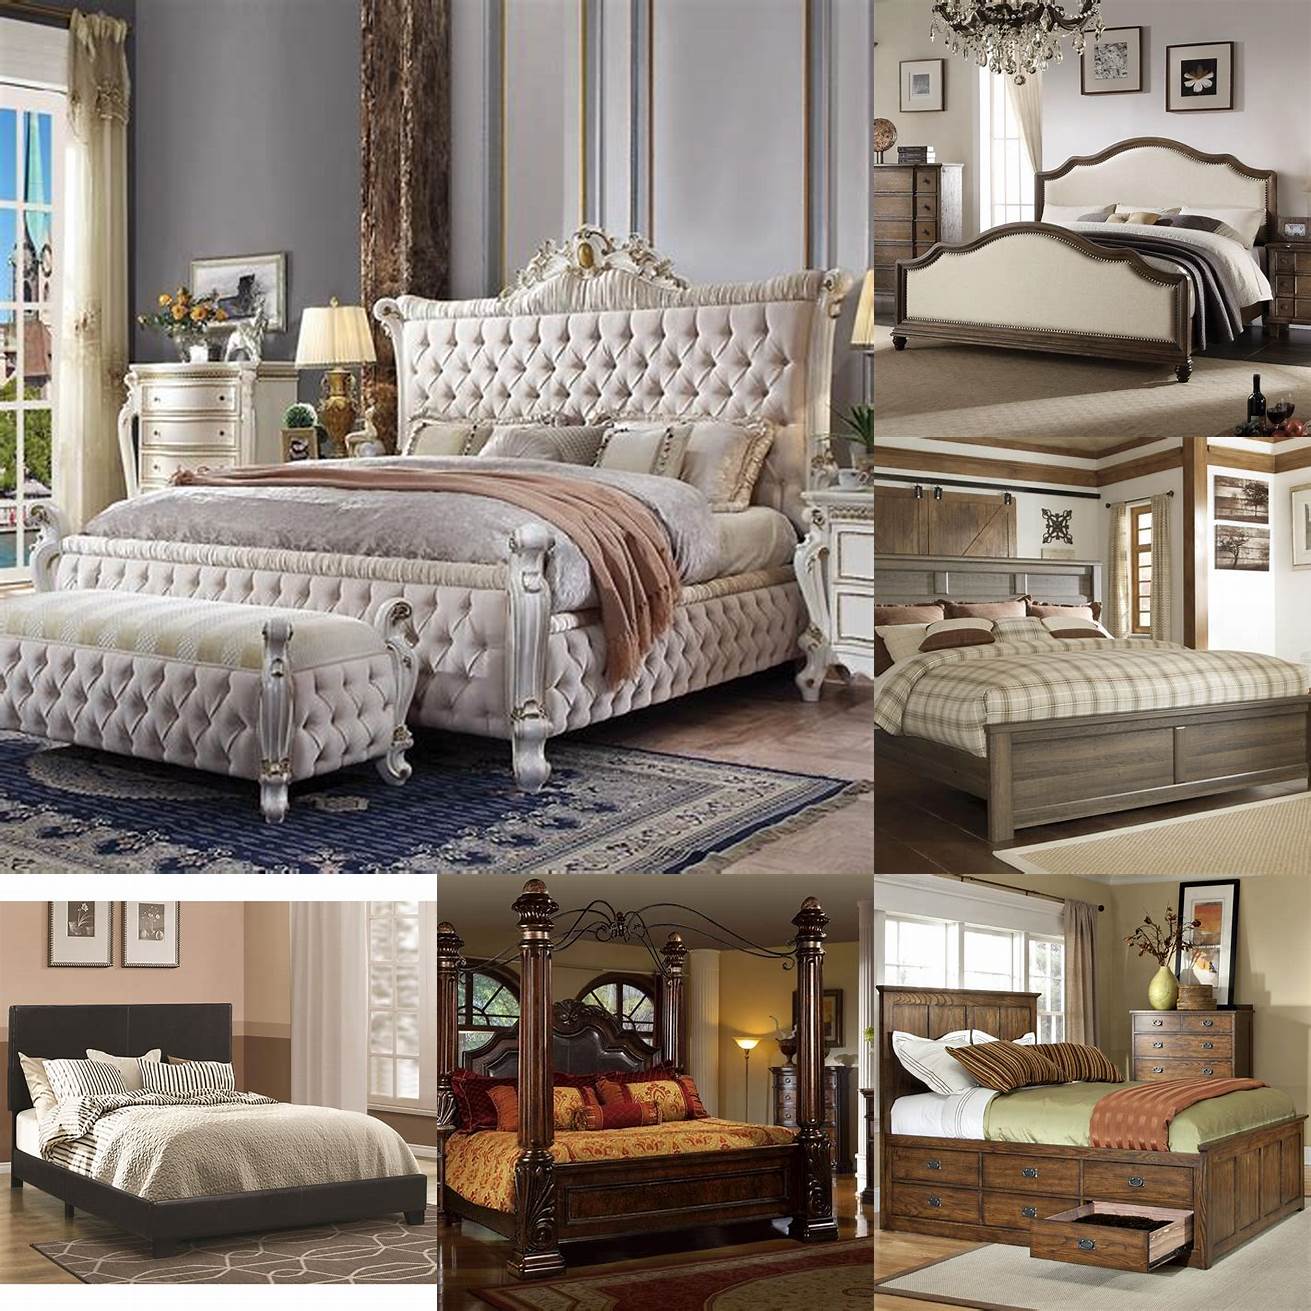 California King Size Bed Frame in a Luxurious Bedroom